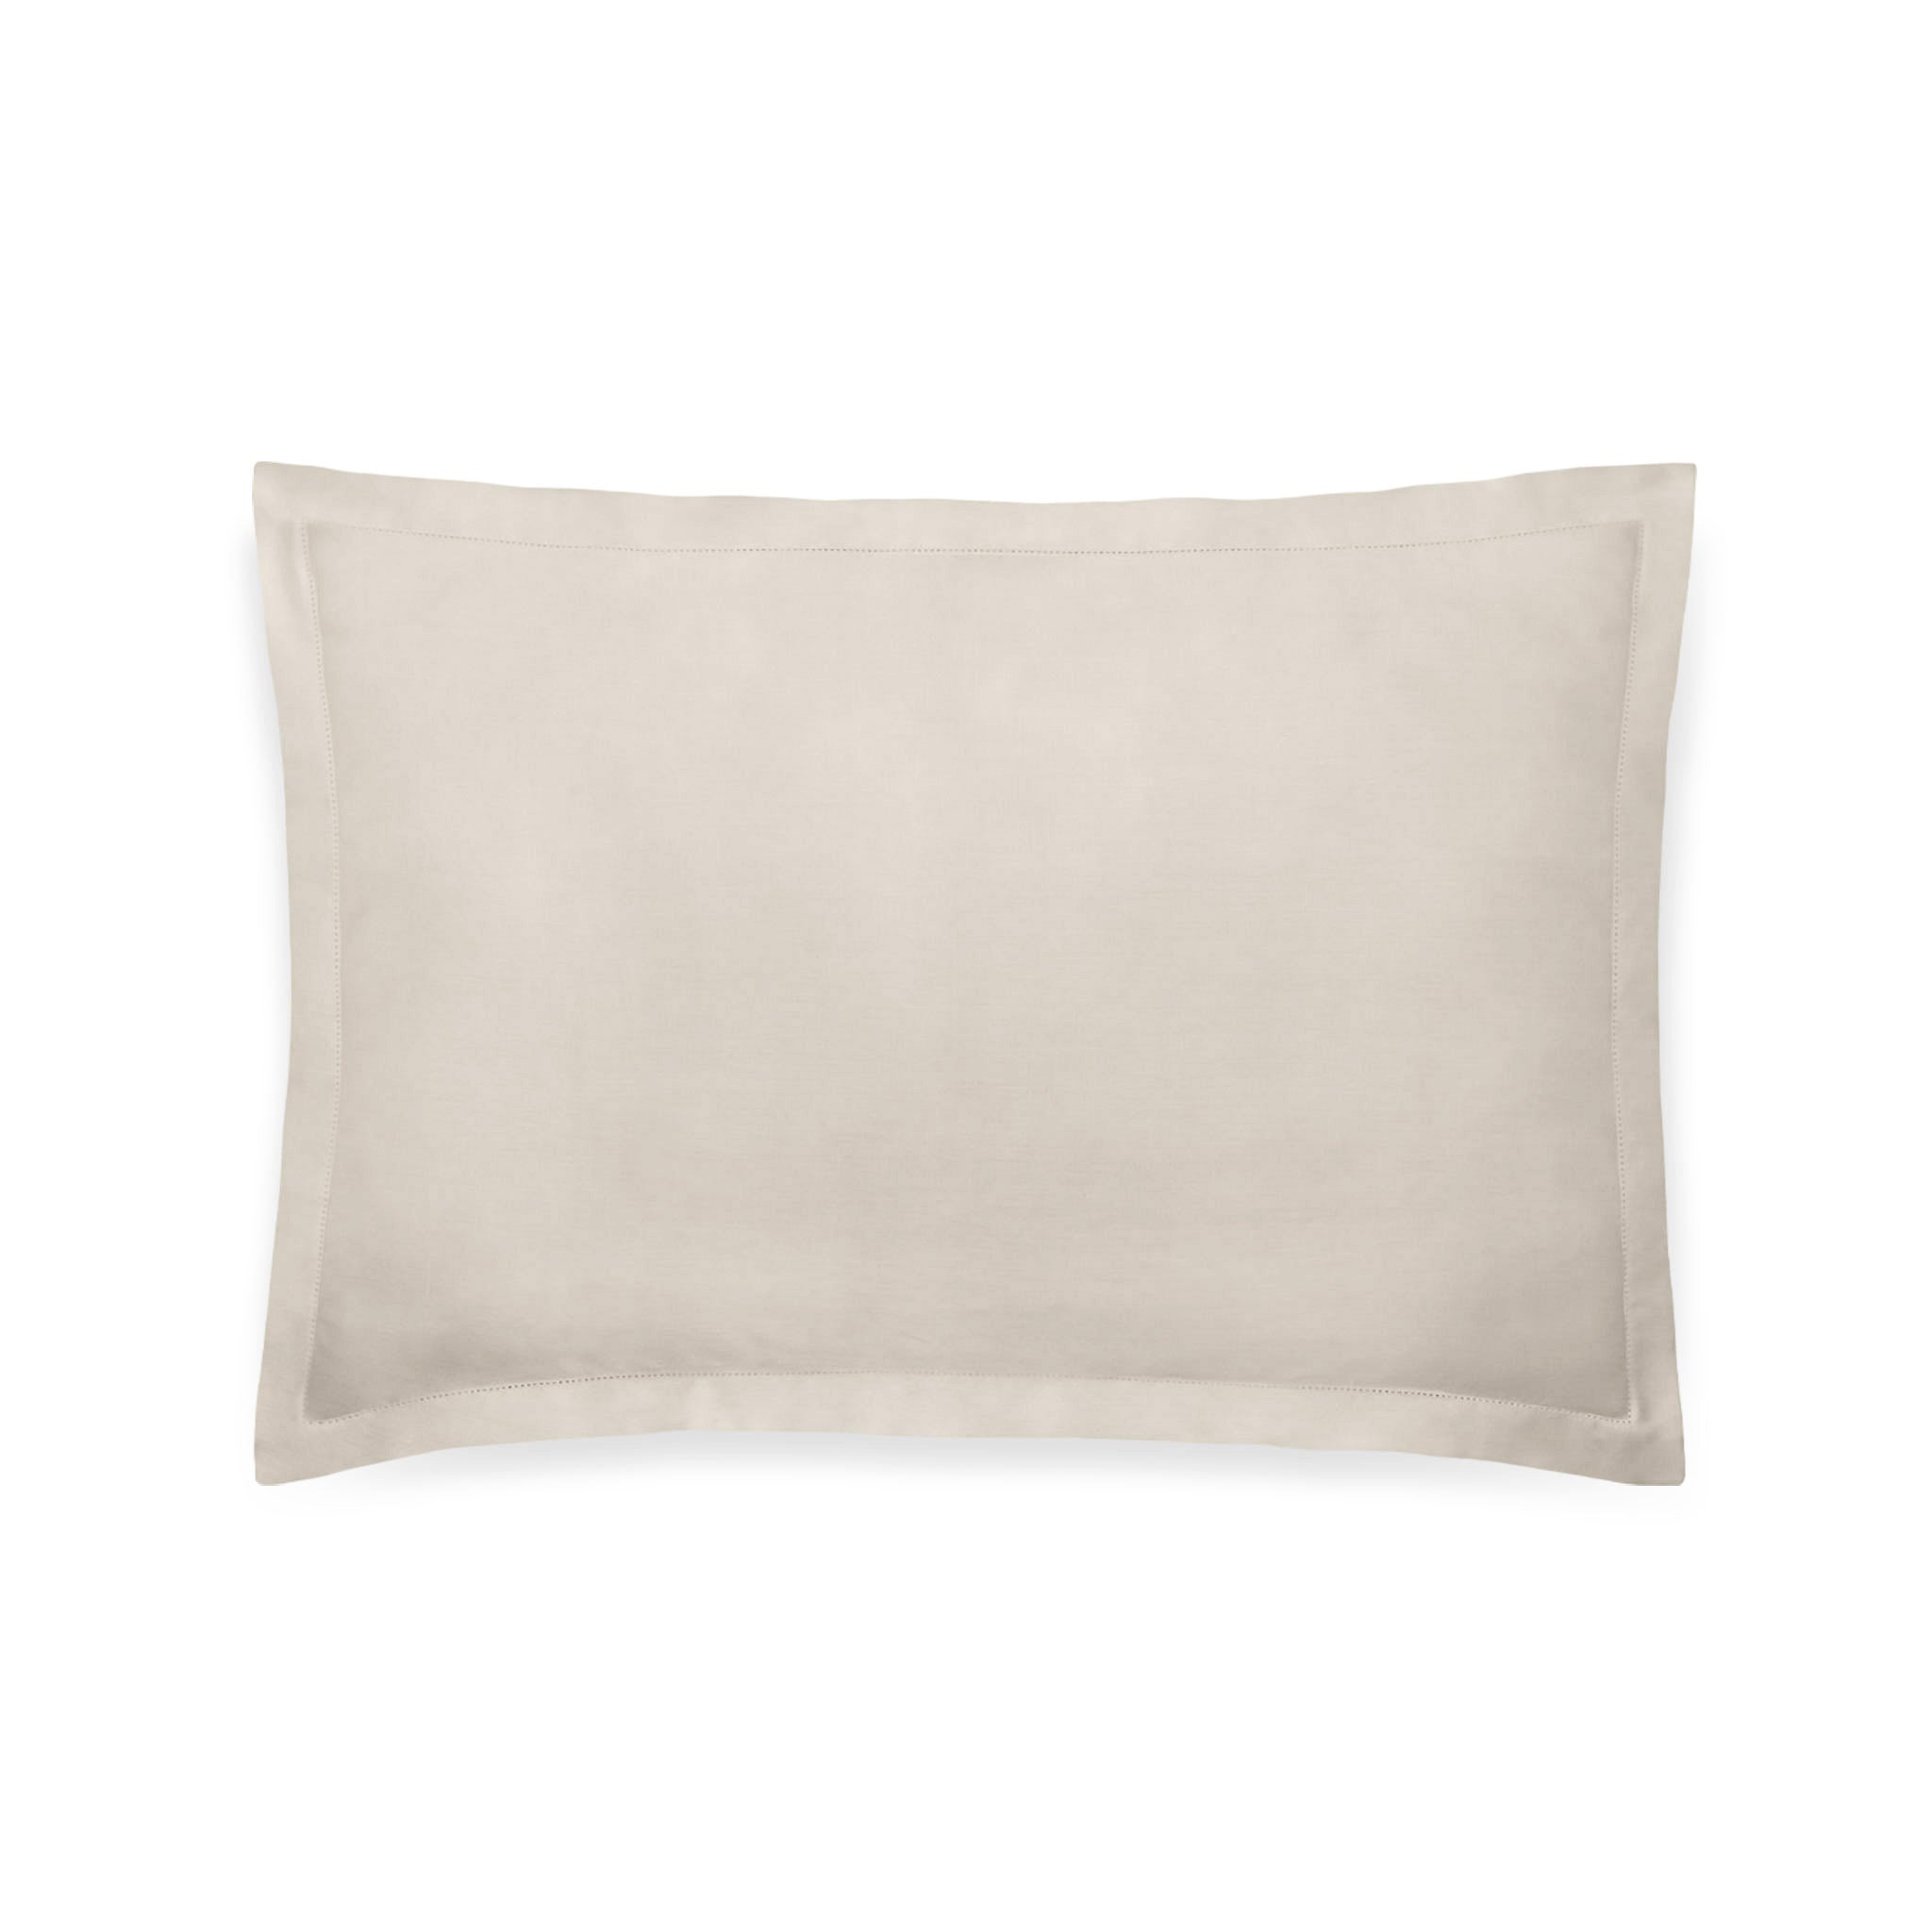 Maia - 100% Washed Linen Oxford Pillowcase